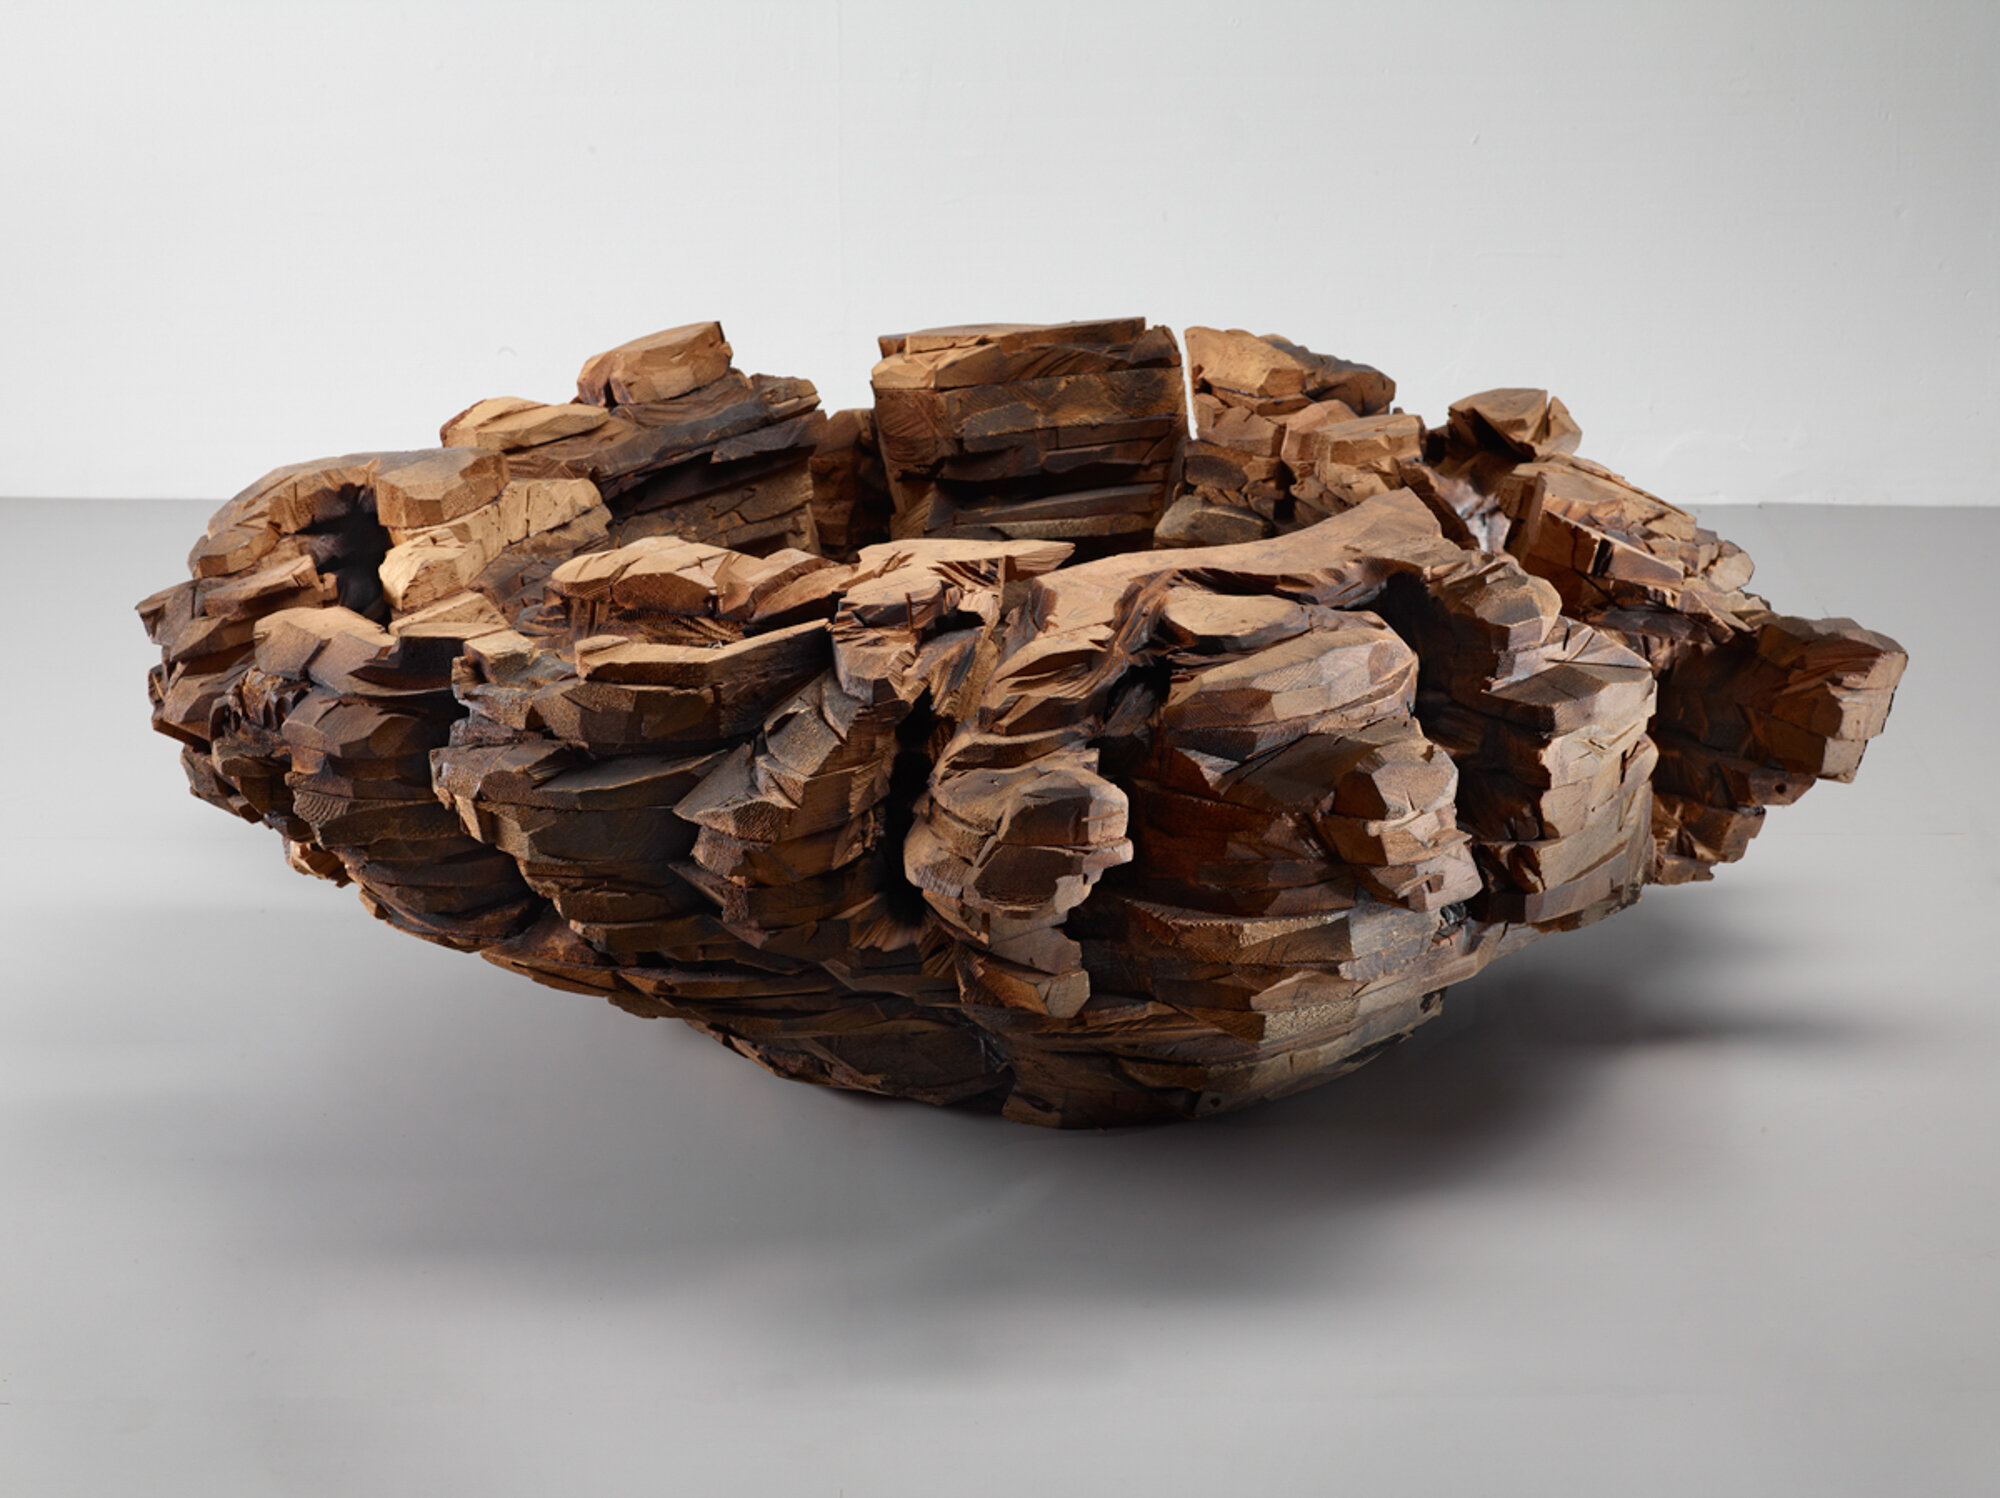       Bowl with Burns , 2011 Cedar and graphite 16 x 45 x 47 in.    MORE IMAGES   Galerie Lelong &amp; Co.  